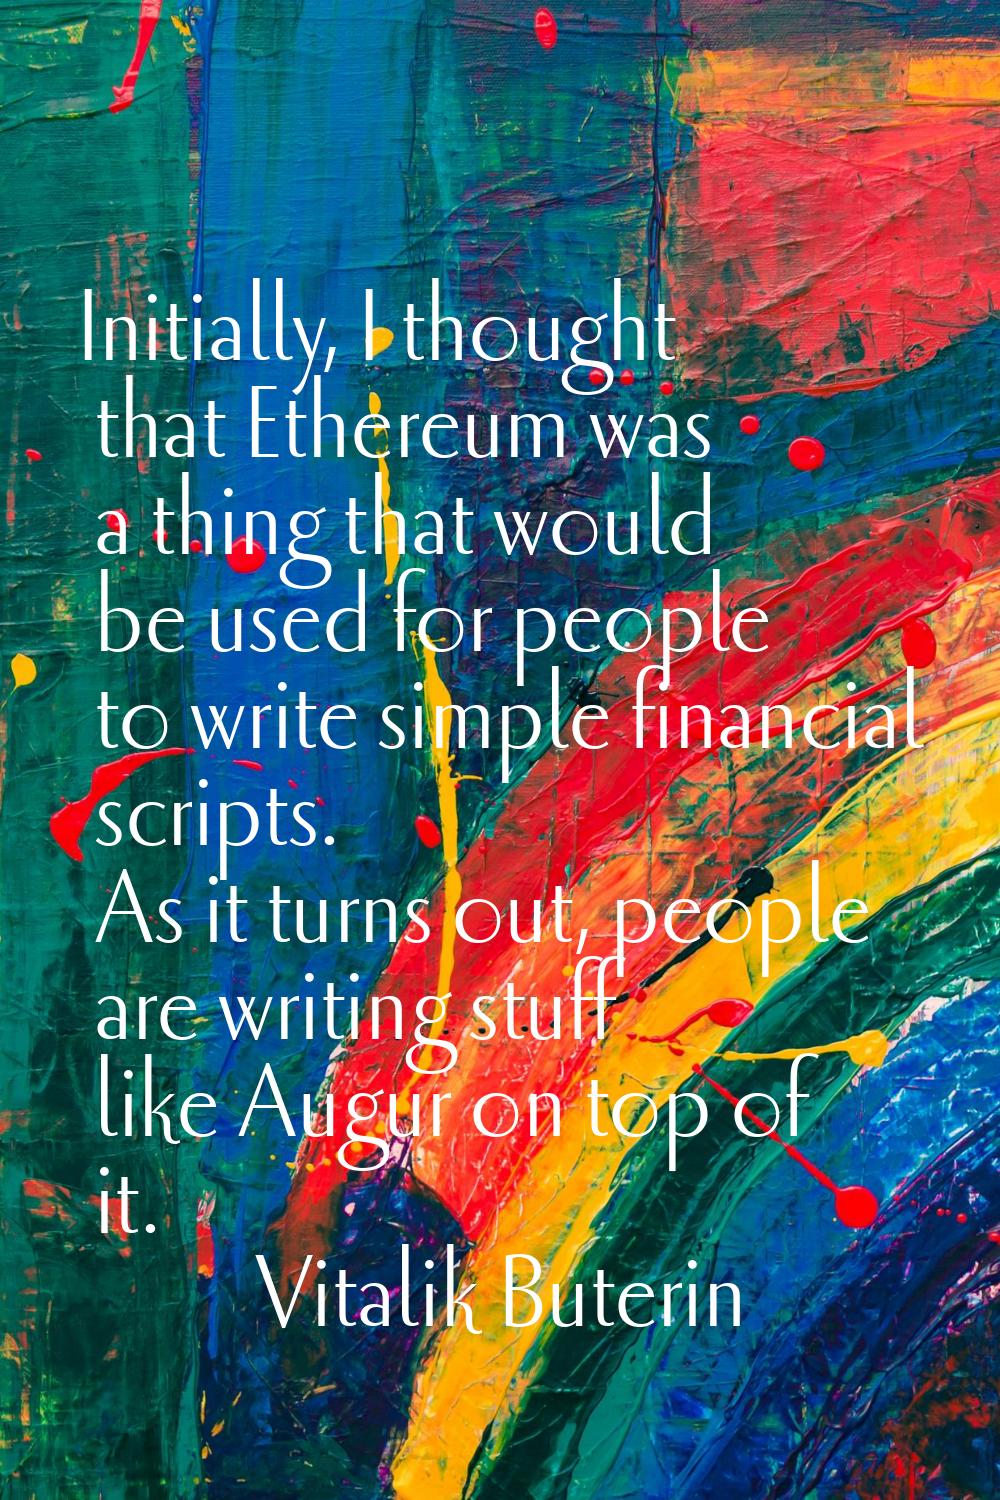 Initially, I thought that Ethereum was a thing that would be used for people to write simple financ